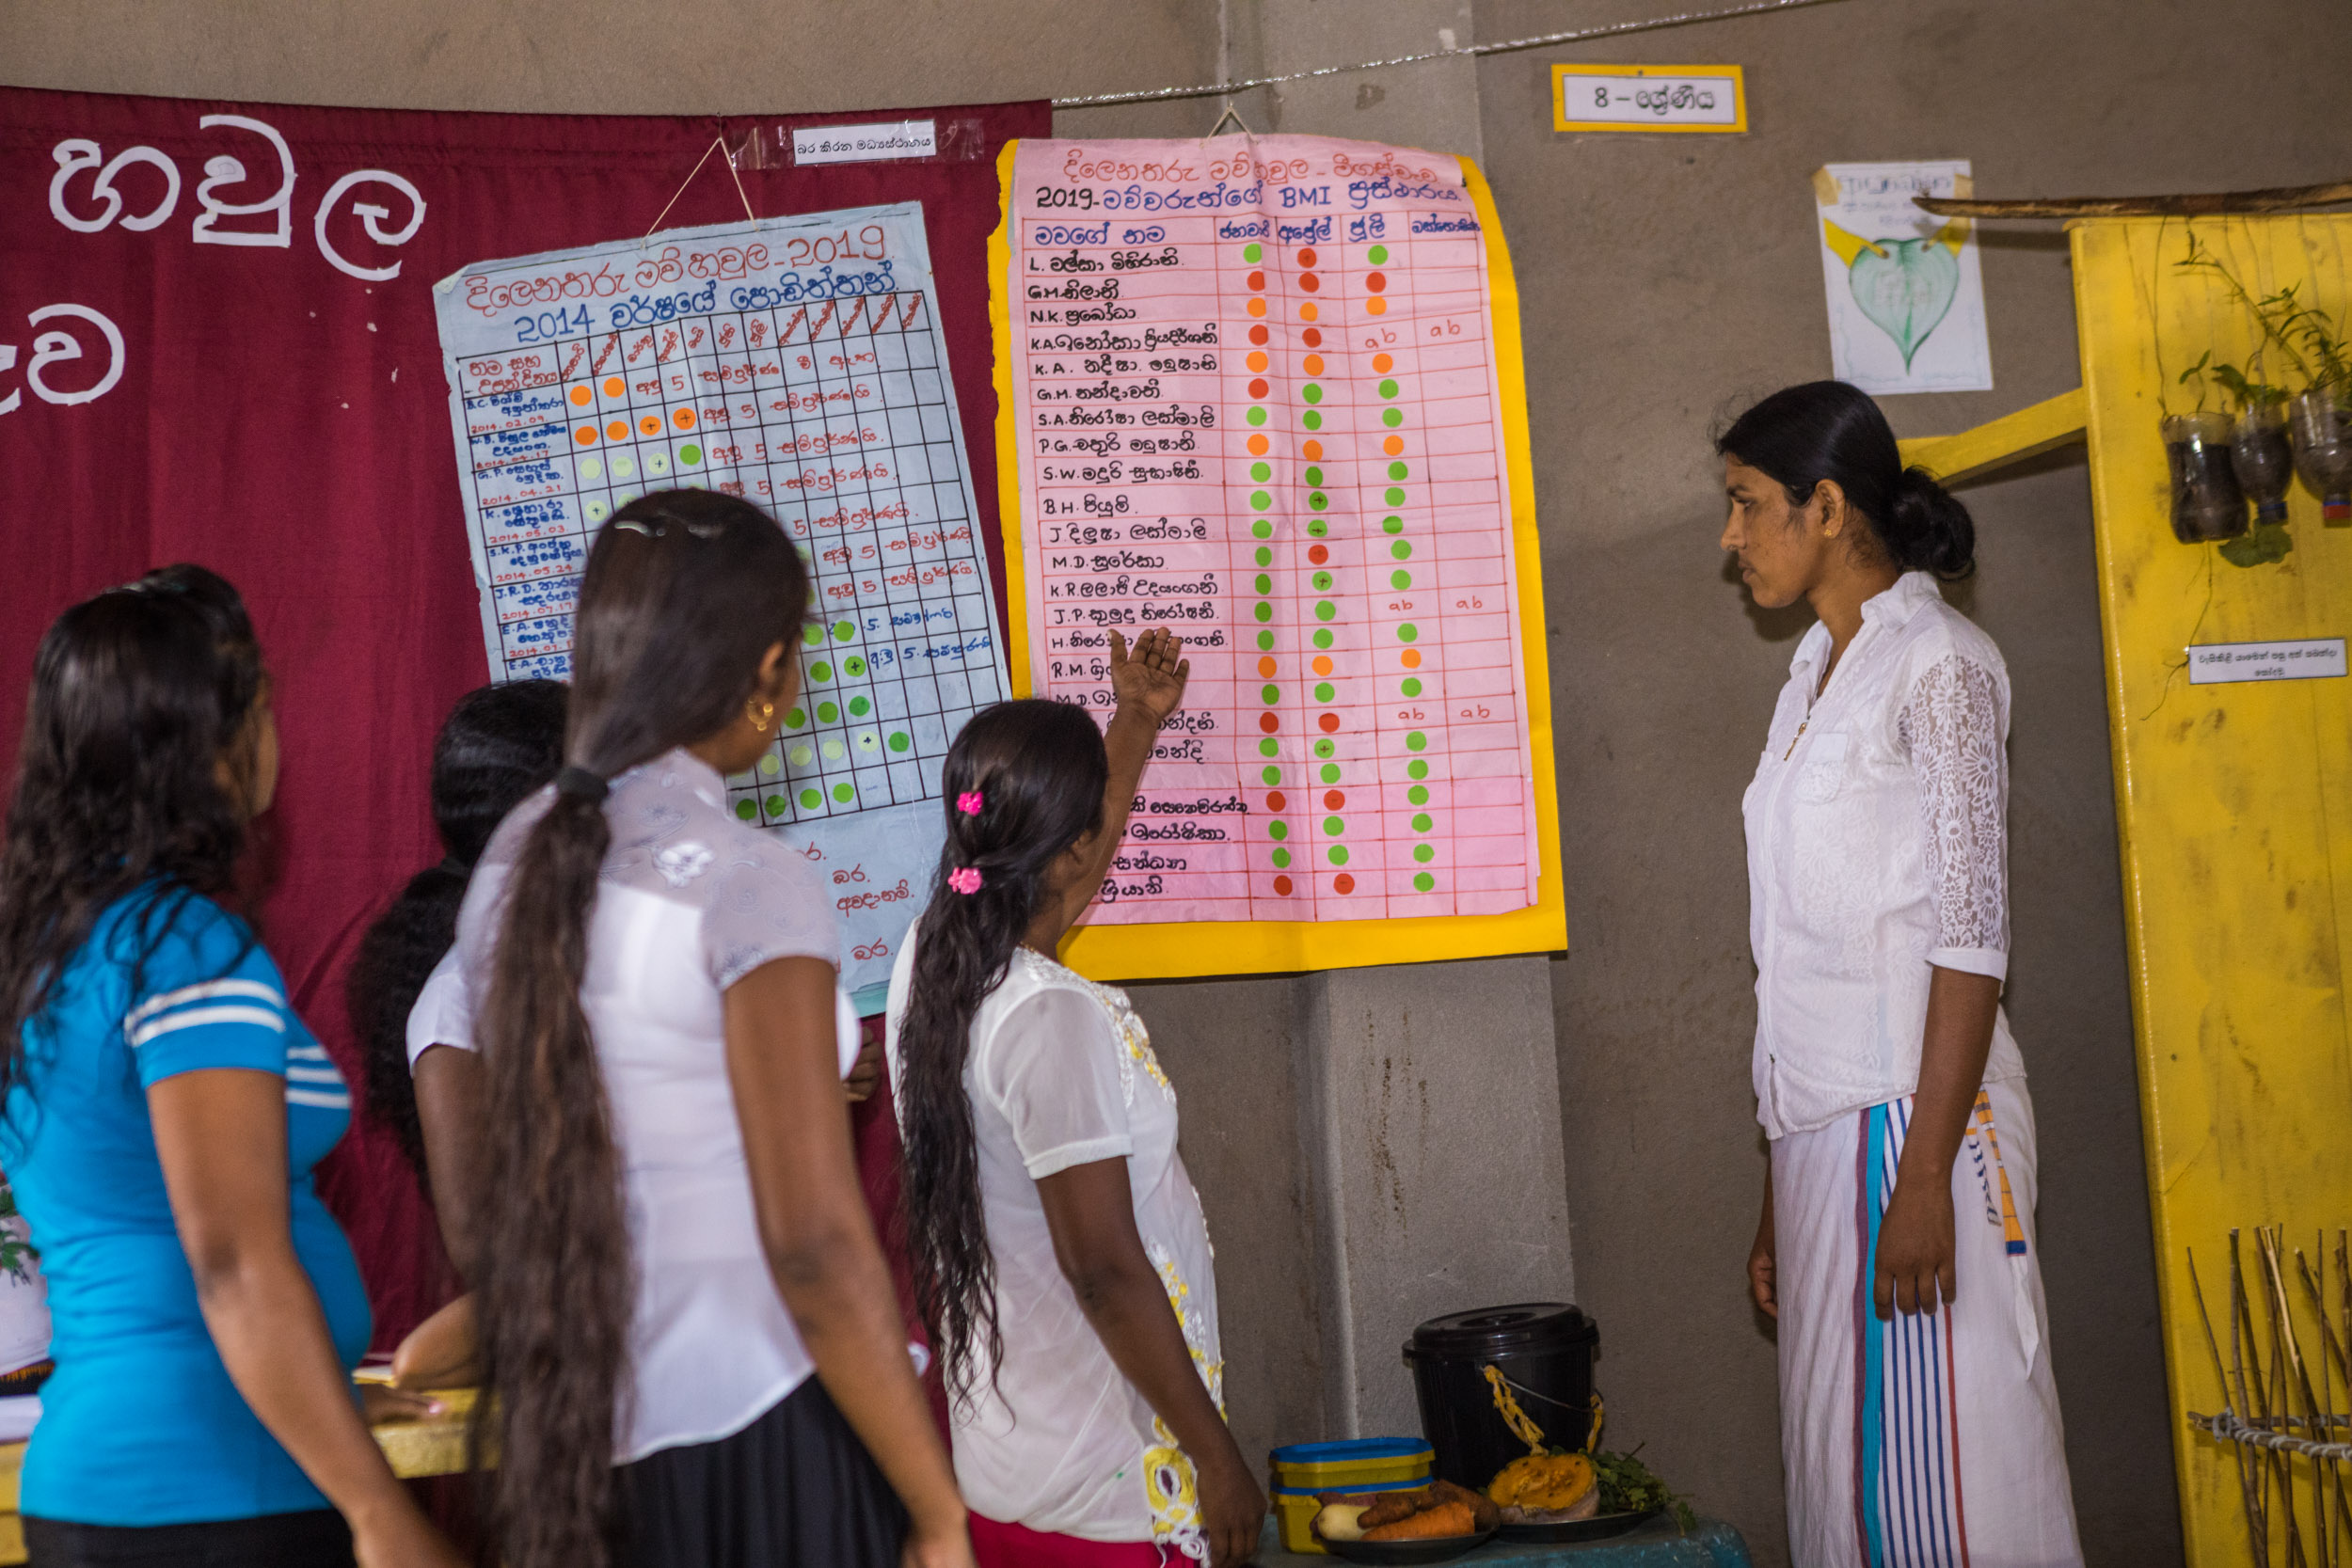 How broader nutrition-based coordination tackles cultural taboos and empowers women in Sri Lanka